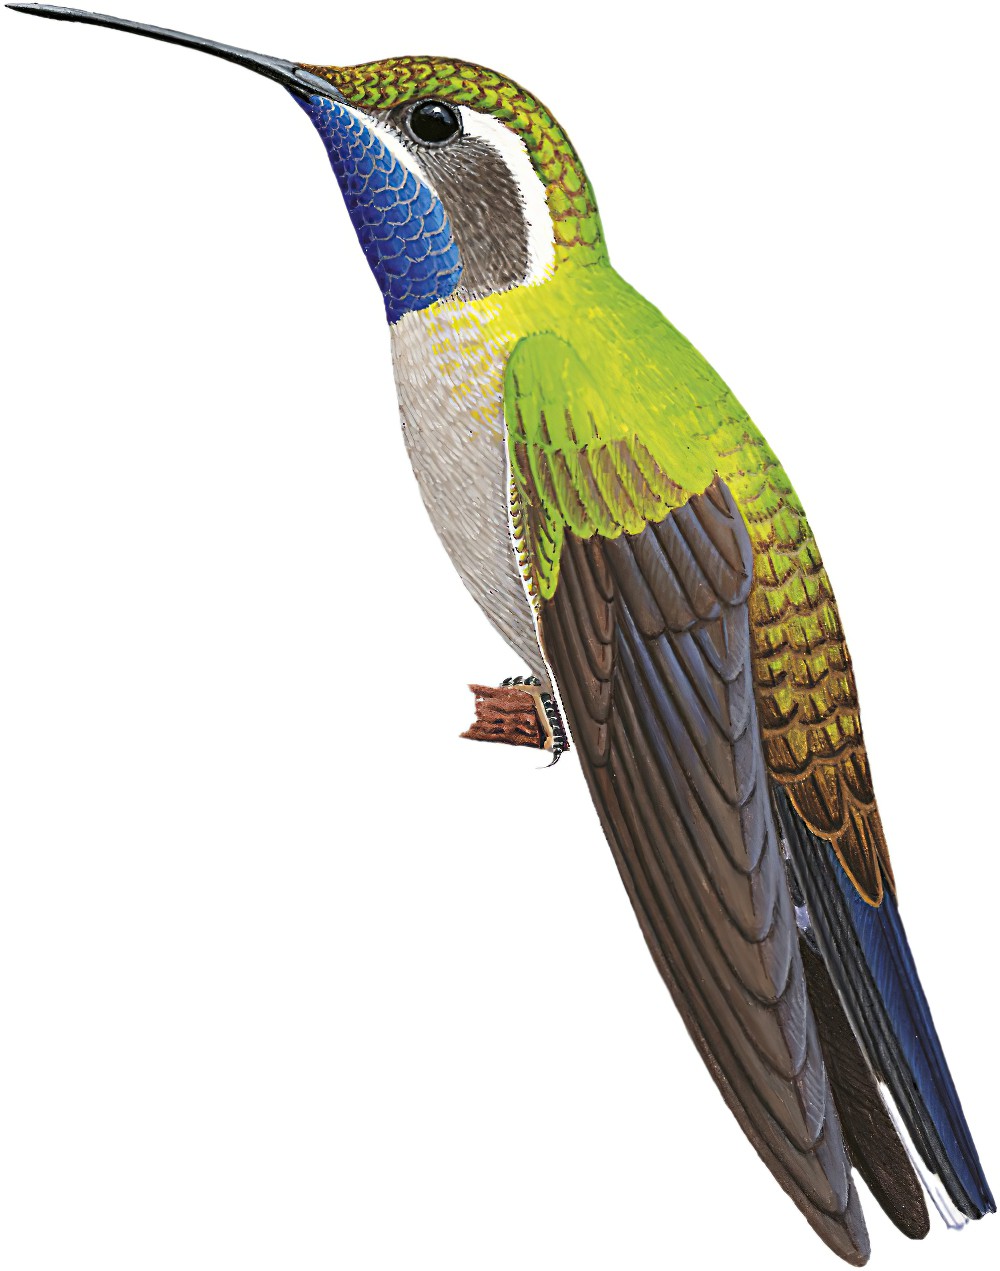 Blue-throated Mountain-gem / Lampornis clemenciae